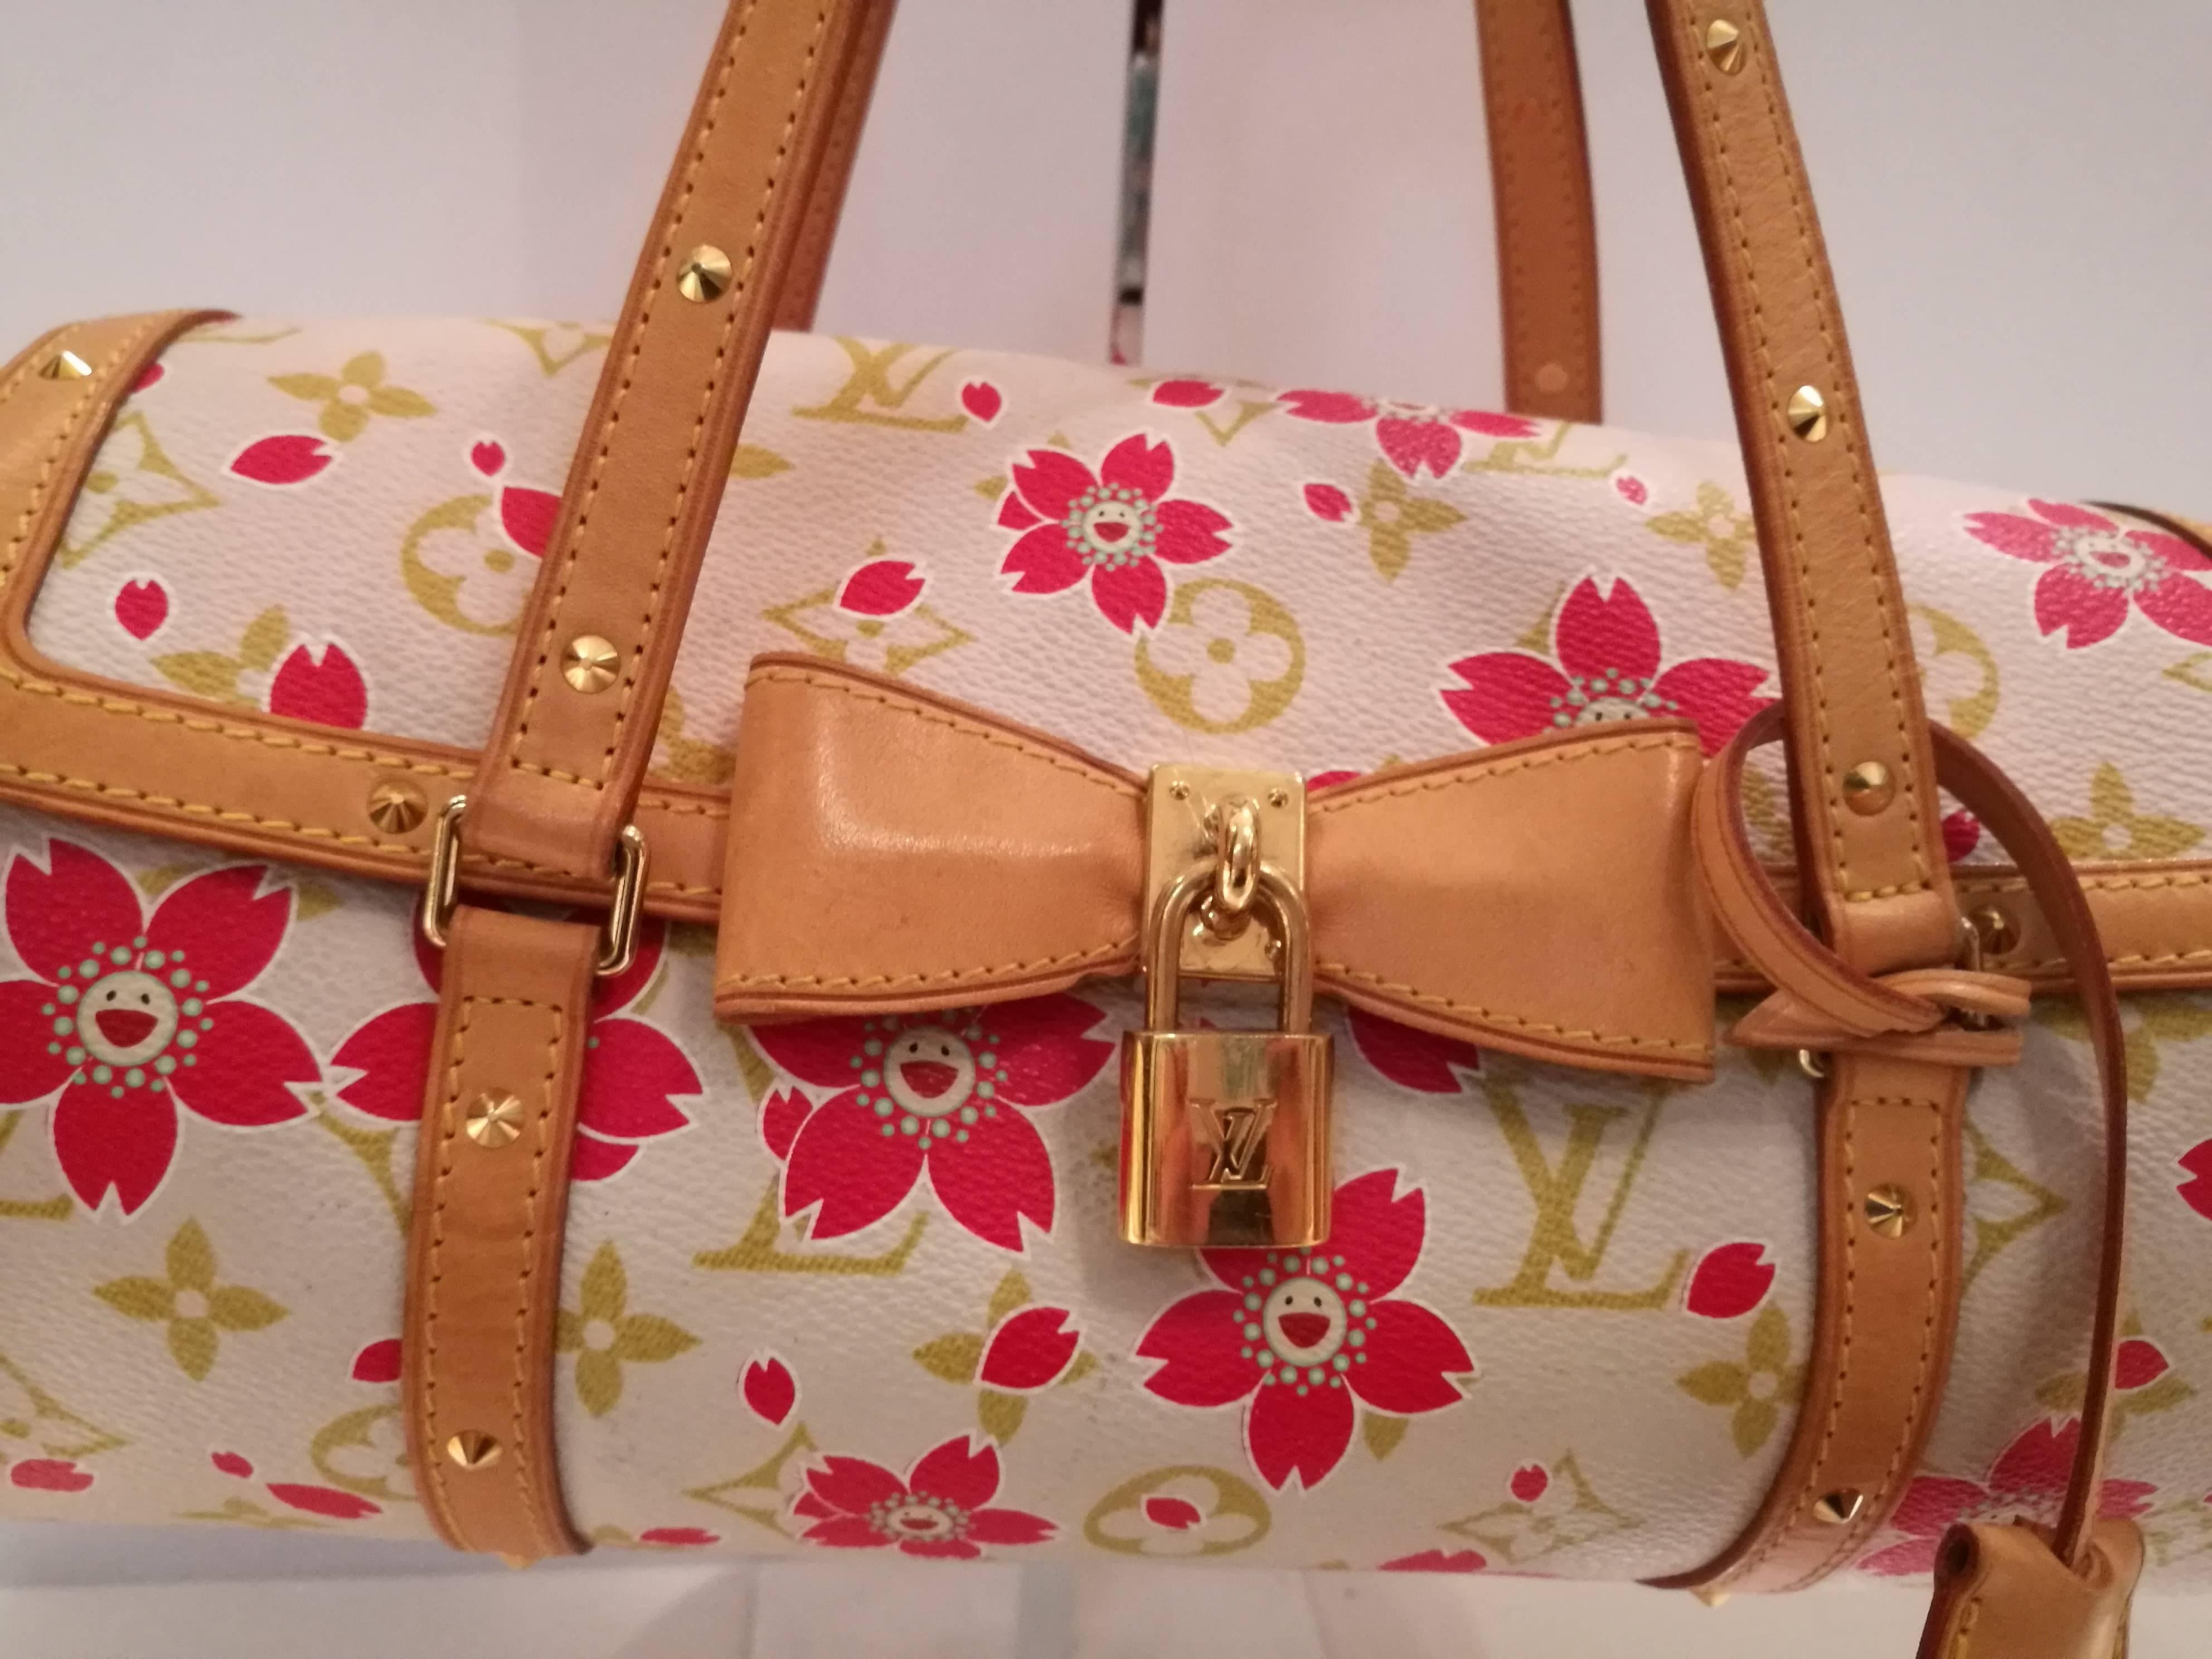 Louis Vuitton’s Limited Edition Cherry Blossom Papillon is a fabulous find in near excelletn condition.  Designed in conjunction with artist Takashi Murakami, this is a highly collectible style that is no longer in production. 

Light pink durable